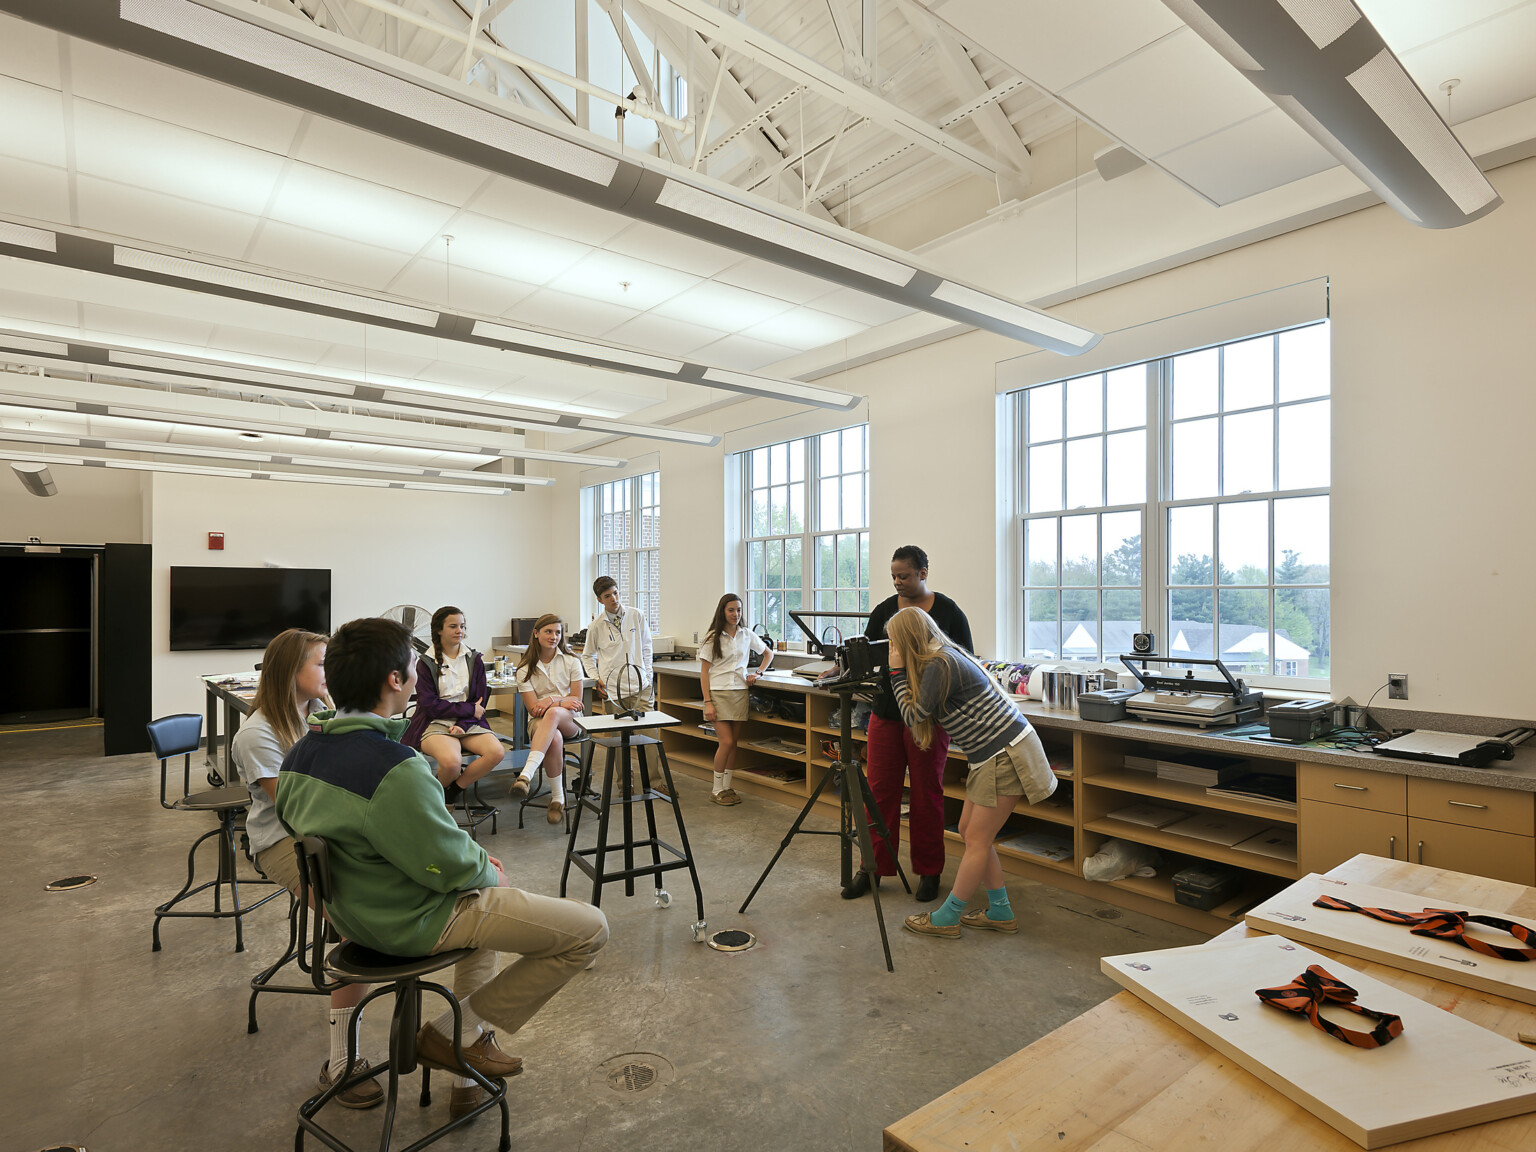 student looks through lens on tripod surrounded by seated classmates and instructor, double-height ceilings, wide floor-to-ceiling windows, concrete polished flooring